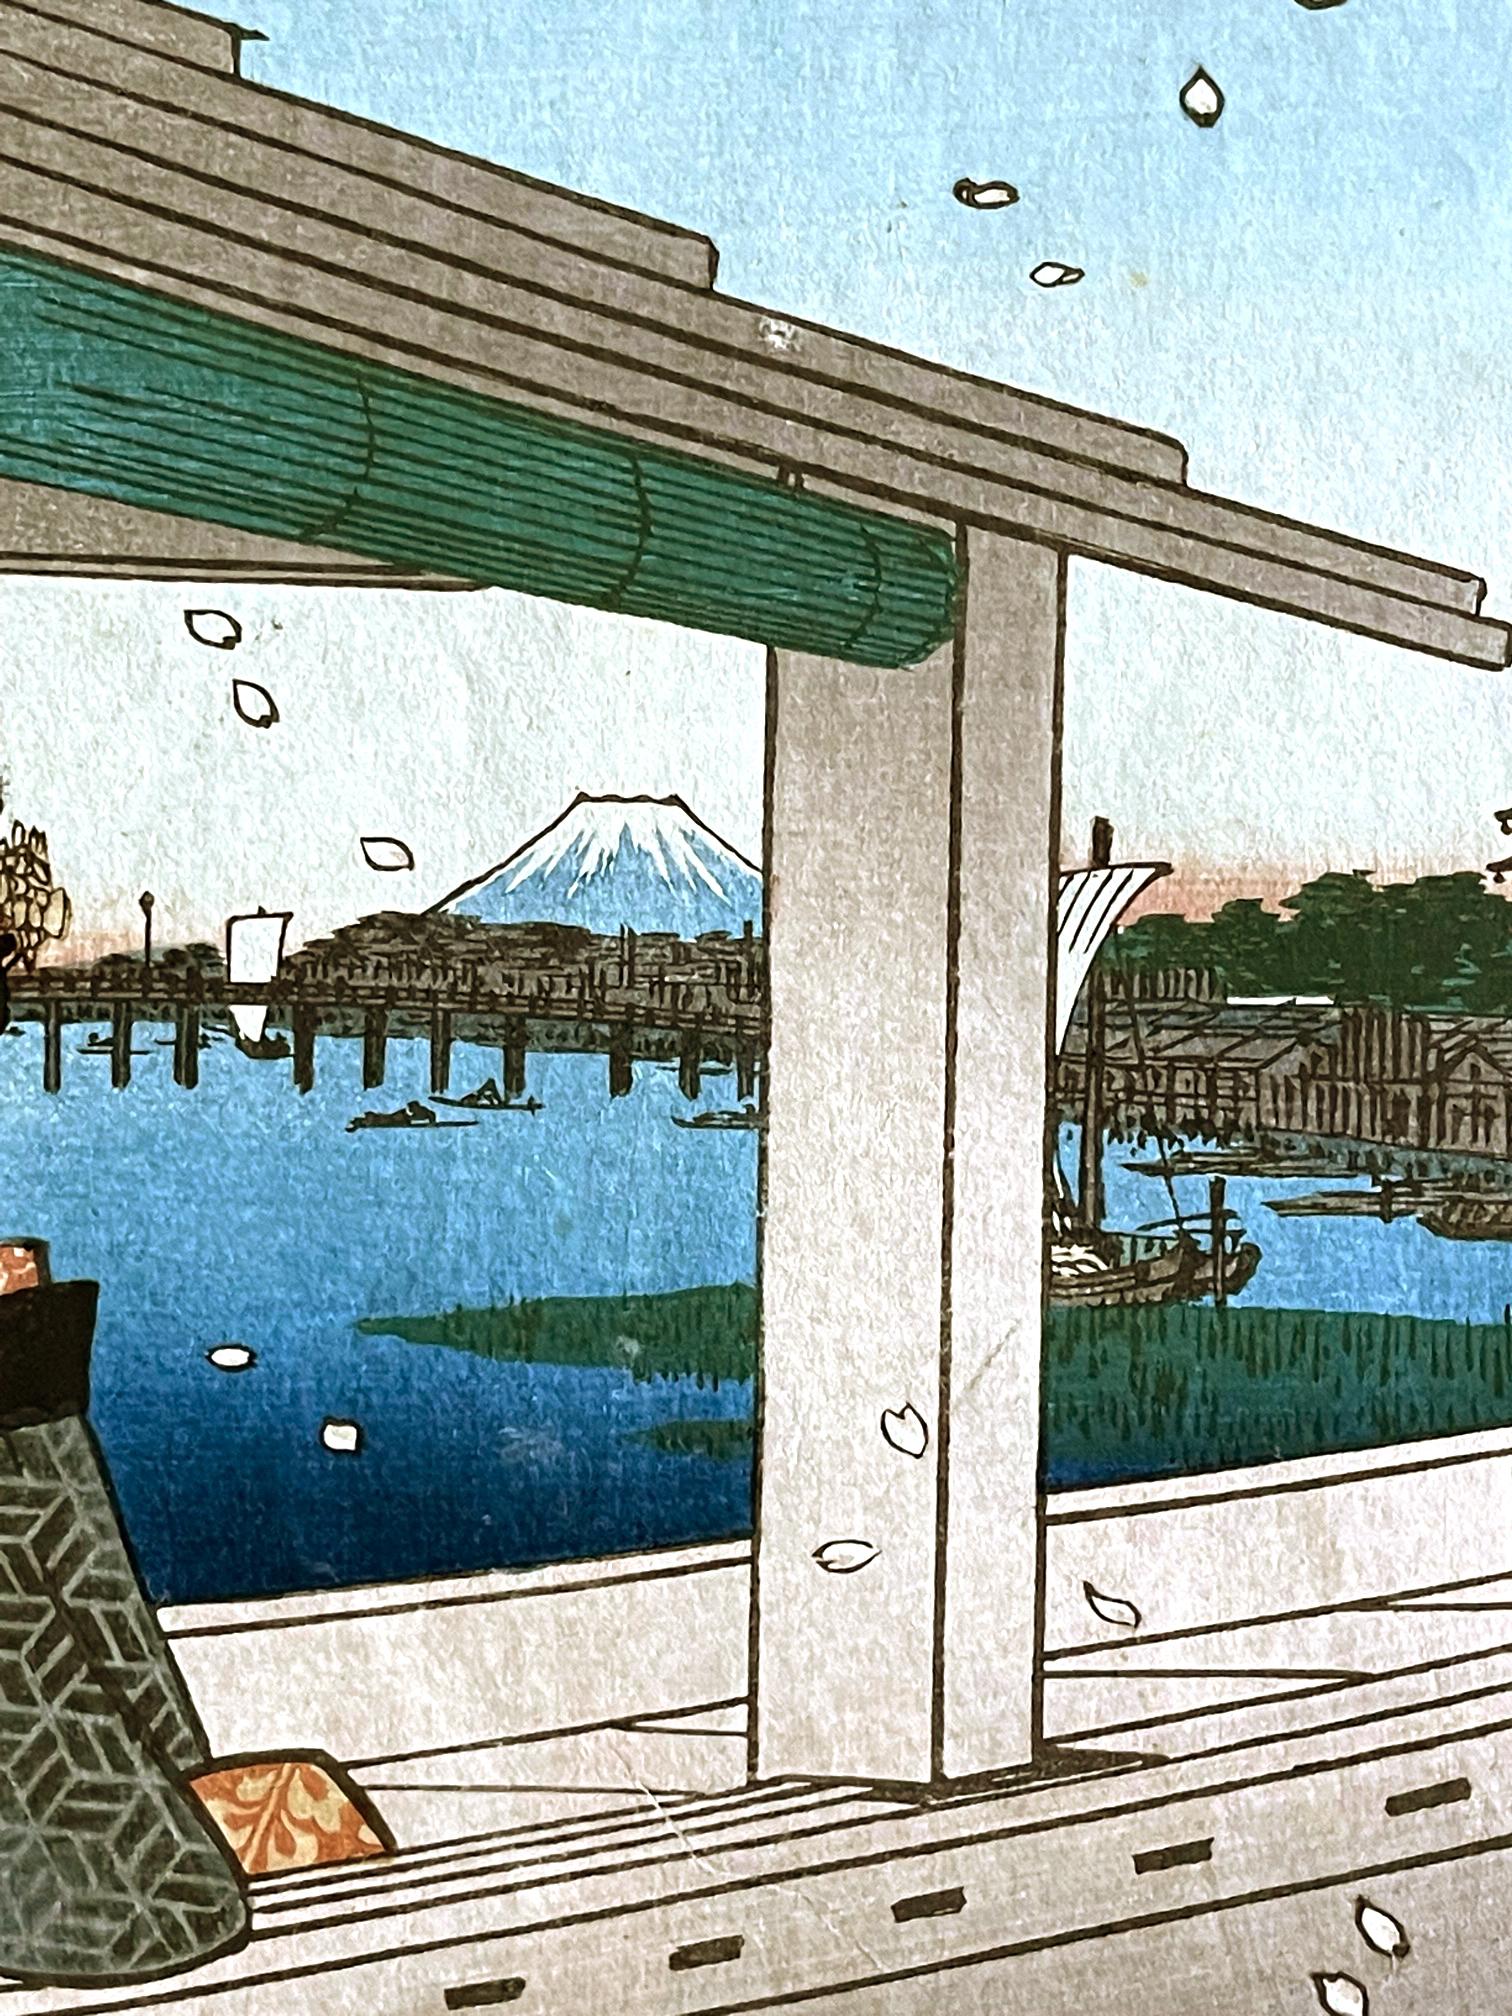 Paper Japanese Woodblock Print One Hundred Famous Views of Edo by Utagawa Hiroshige For Sale